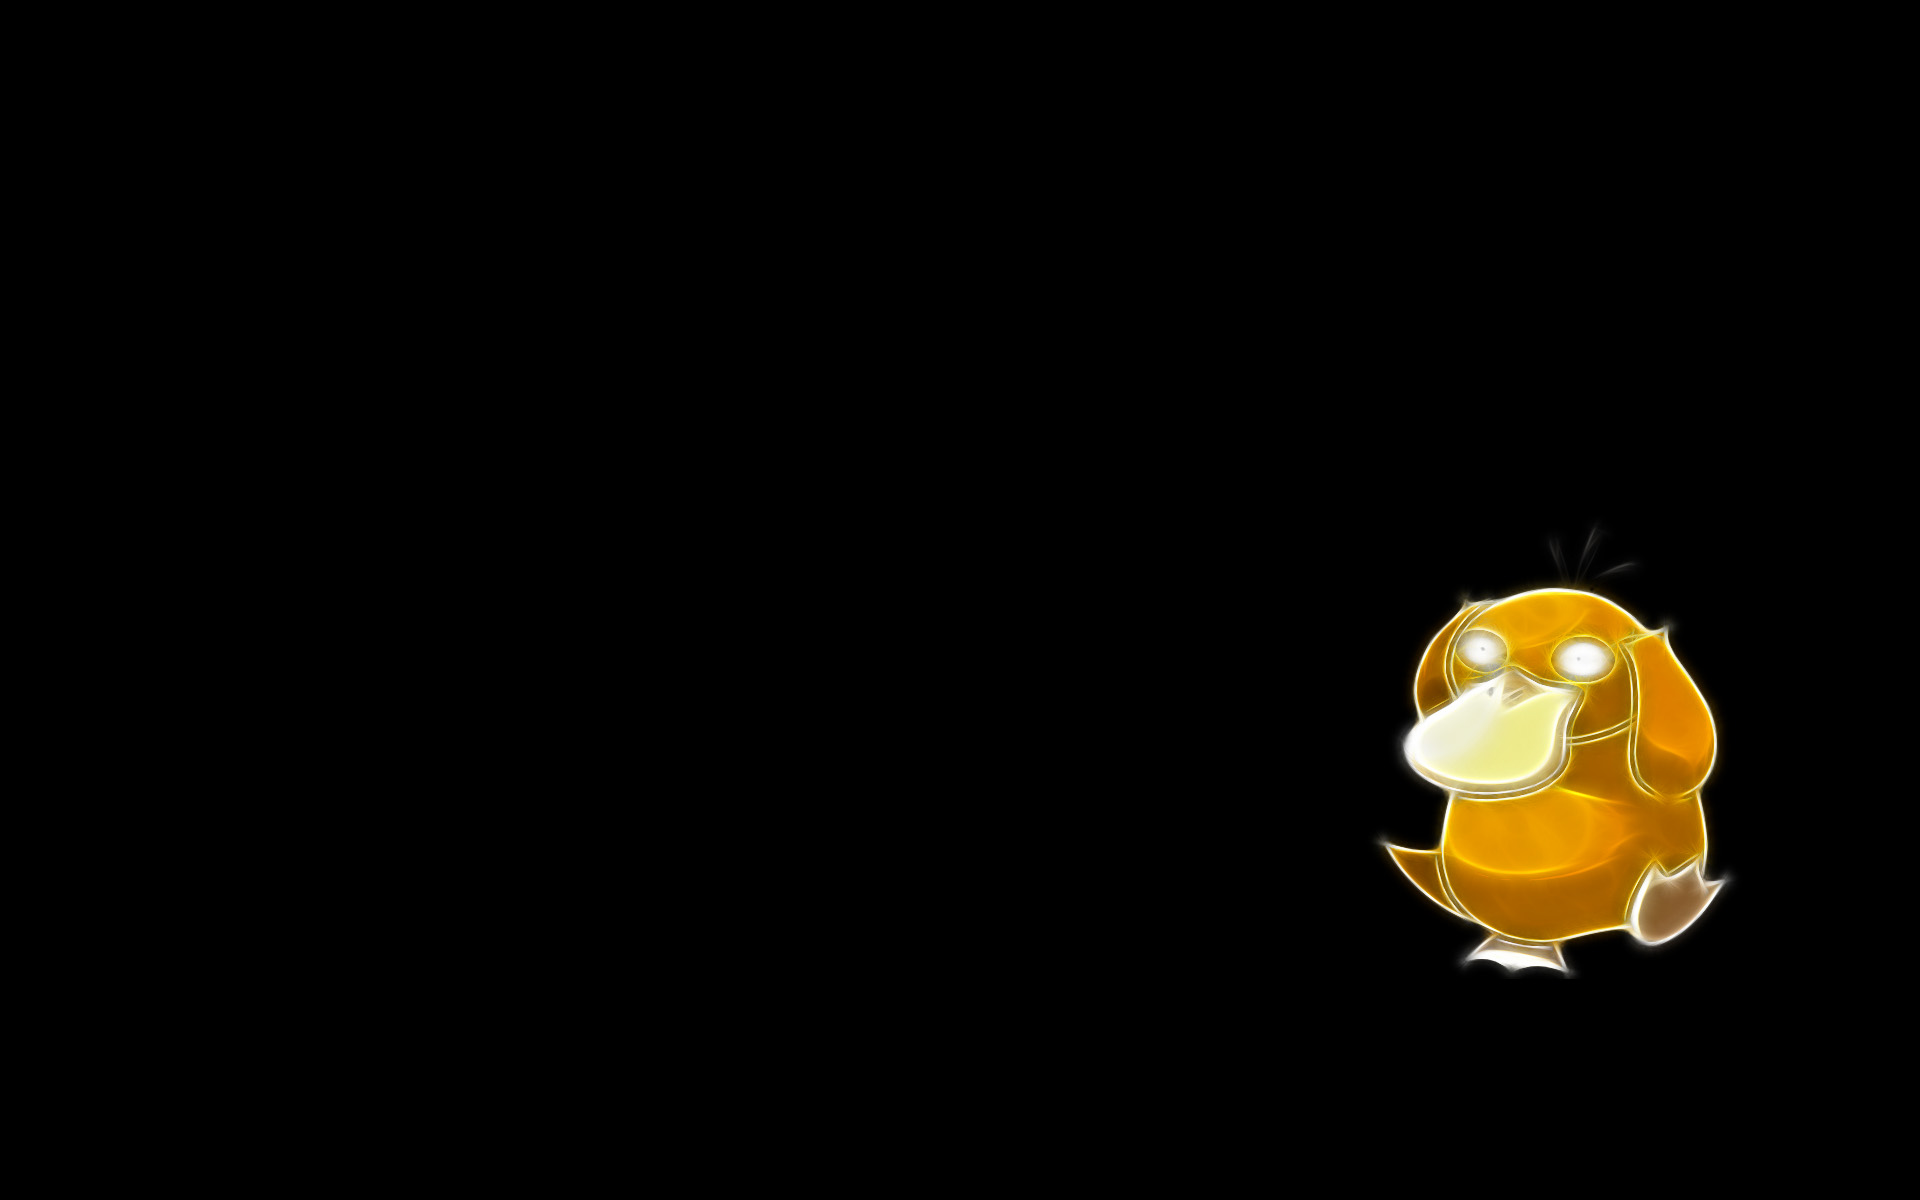 Download free HD wallpaper from above link! #pokemon #PsyduckHDWallpaper  #PsyduckHDWallpaper | Psyduck, Cool pokemon wallpapers, Cute pokemon  wallpaper